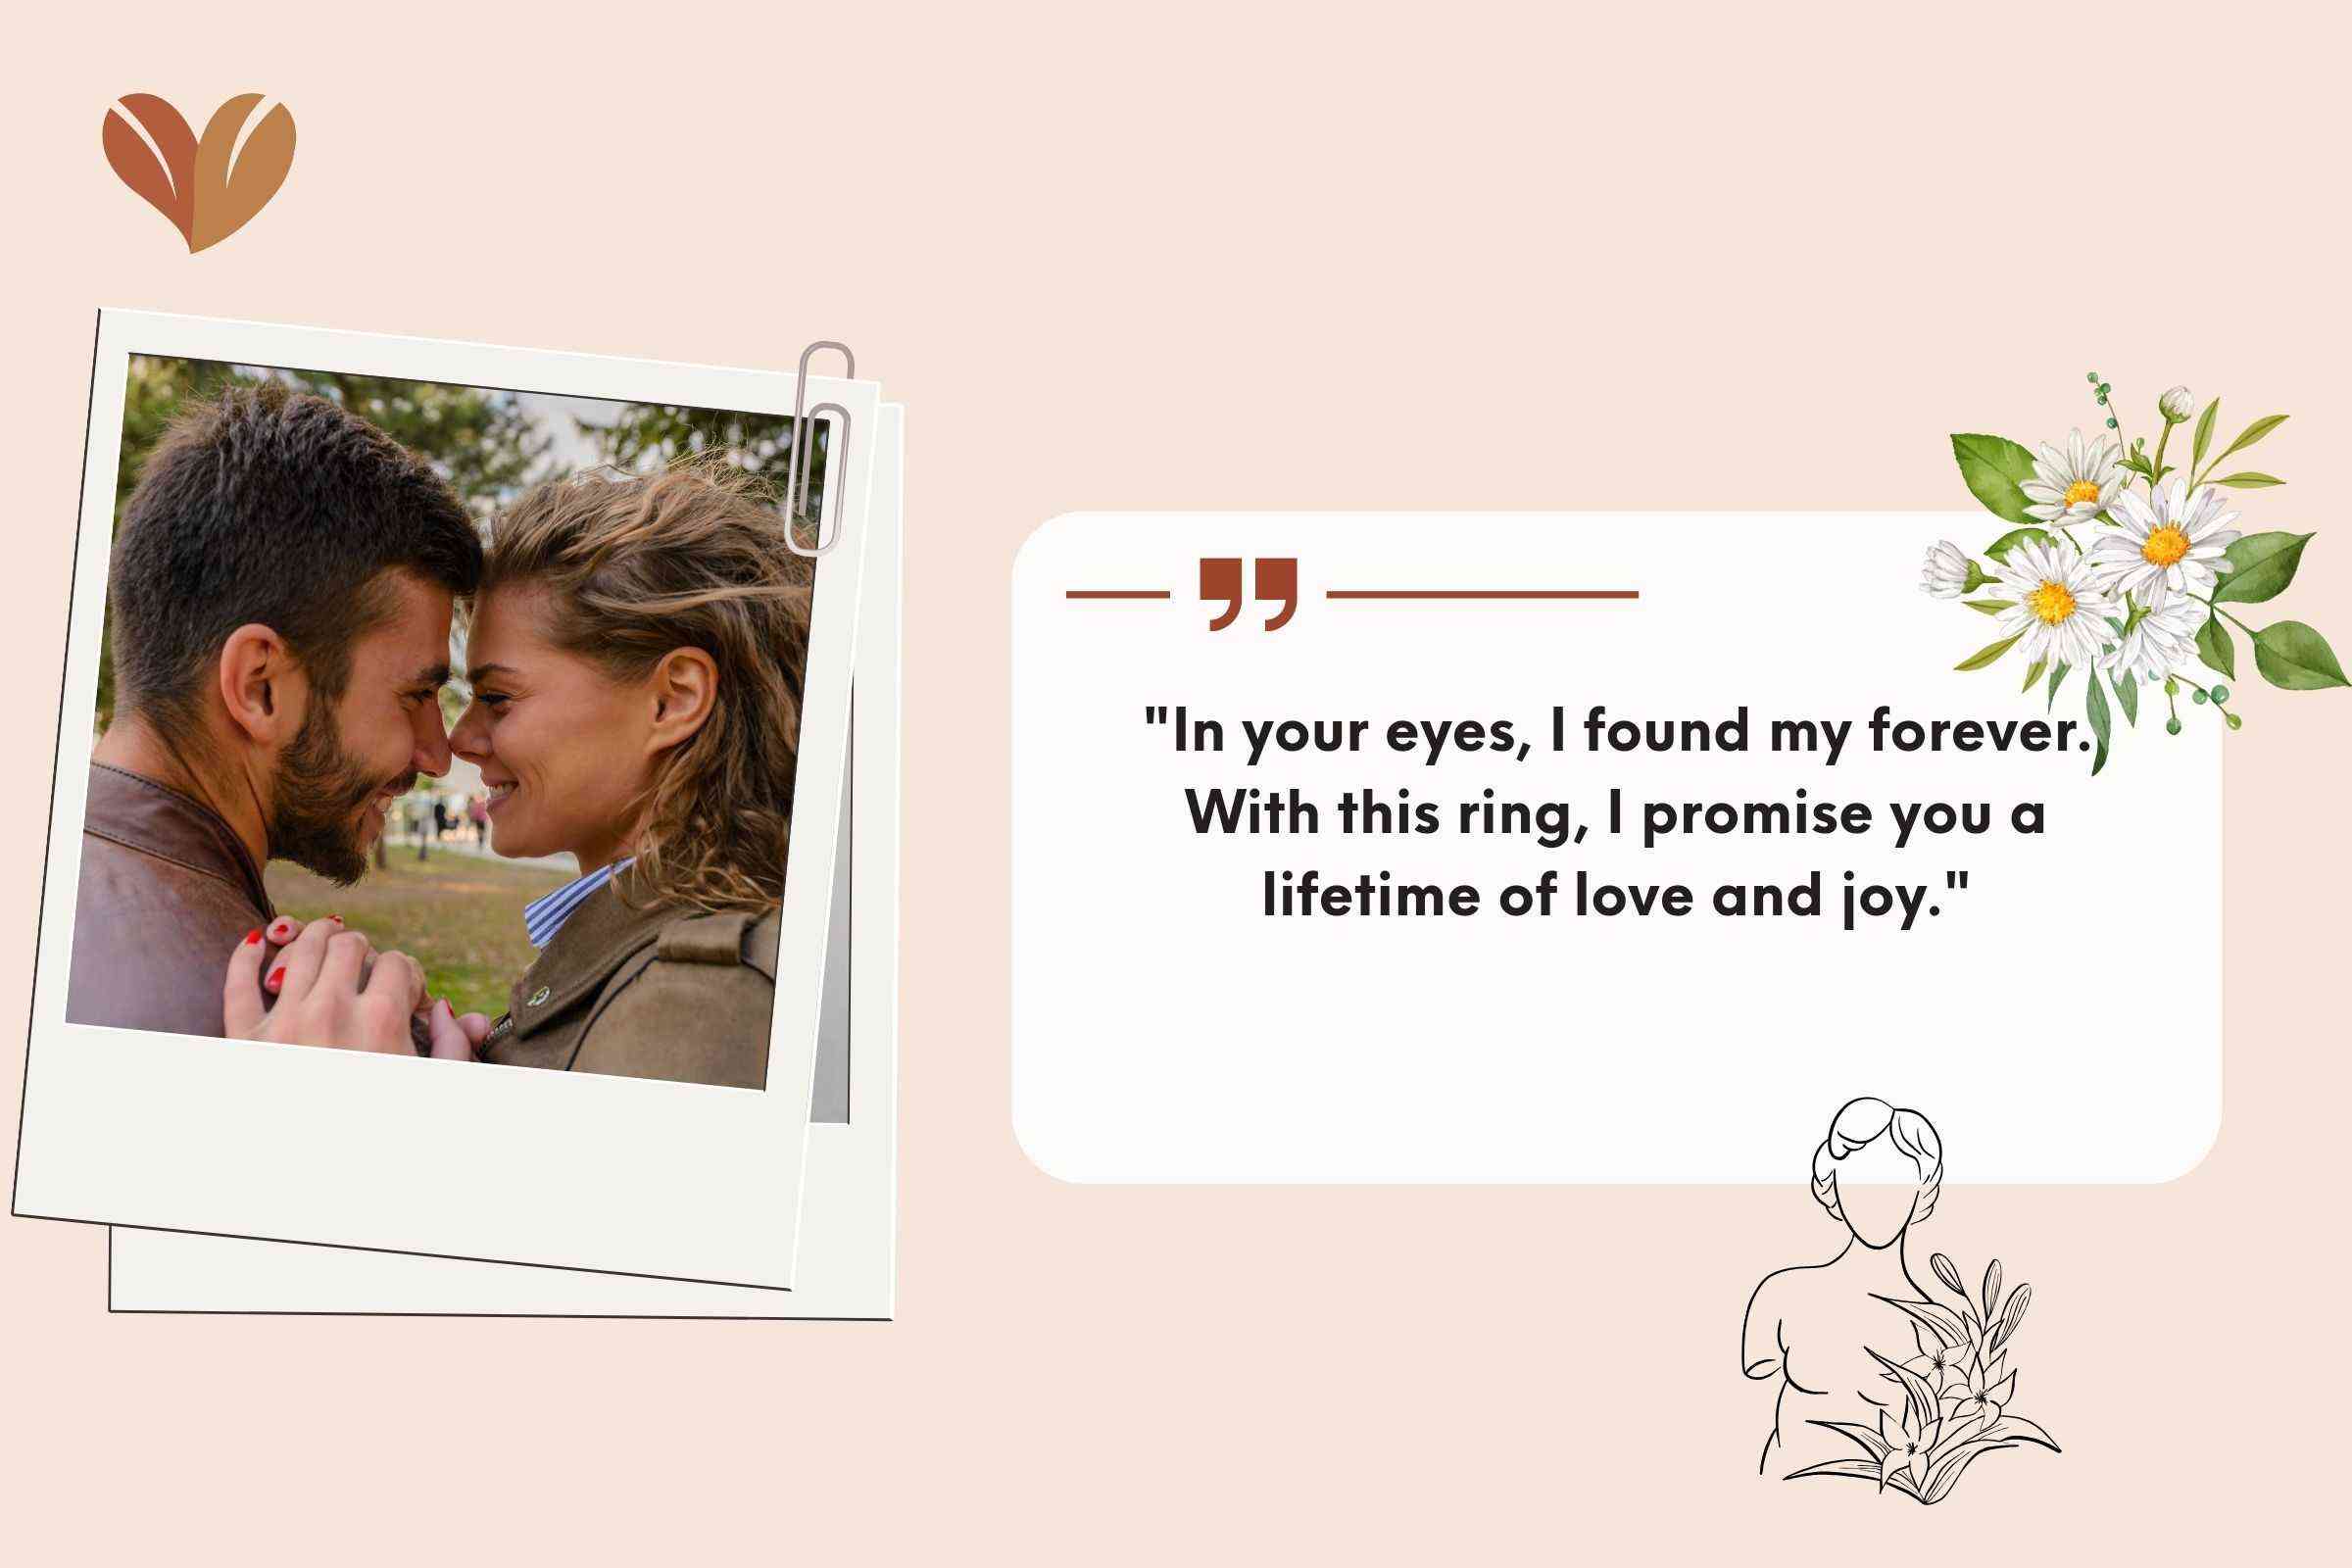 "In your eyes, I found my forever. Here's to a lifetime of love and endless joy together."